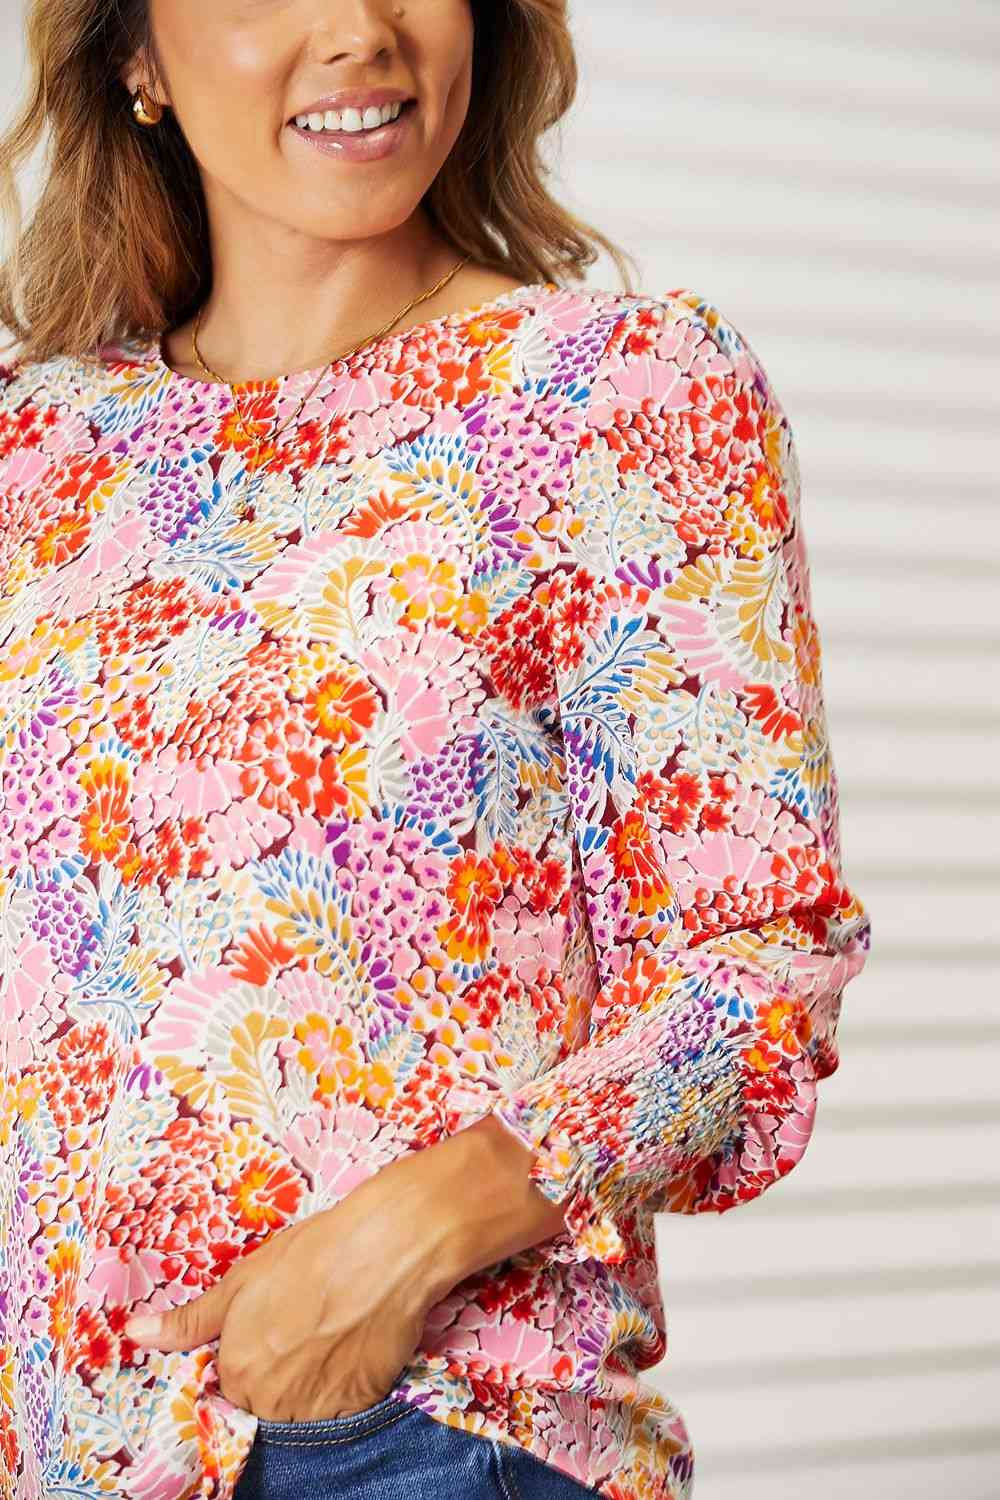 Double Take Floral Print Long Puff Sleeve Blouse - nailedmoms